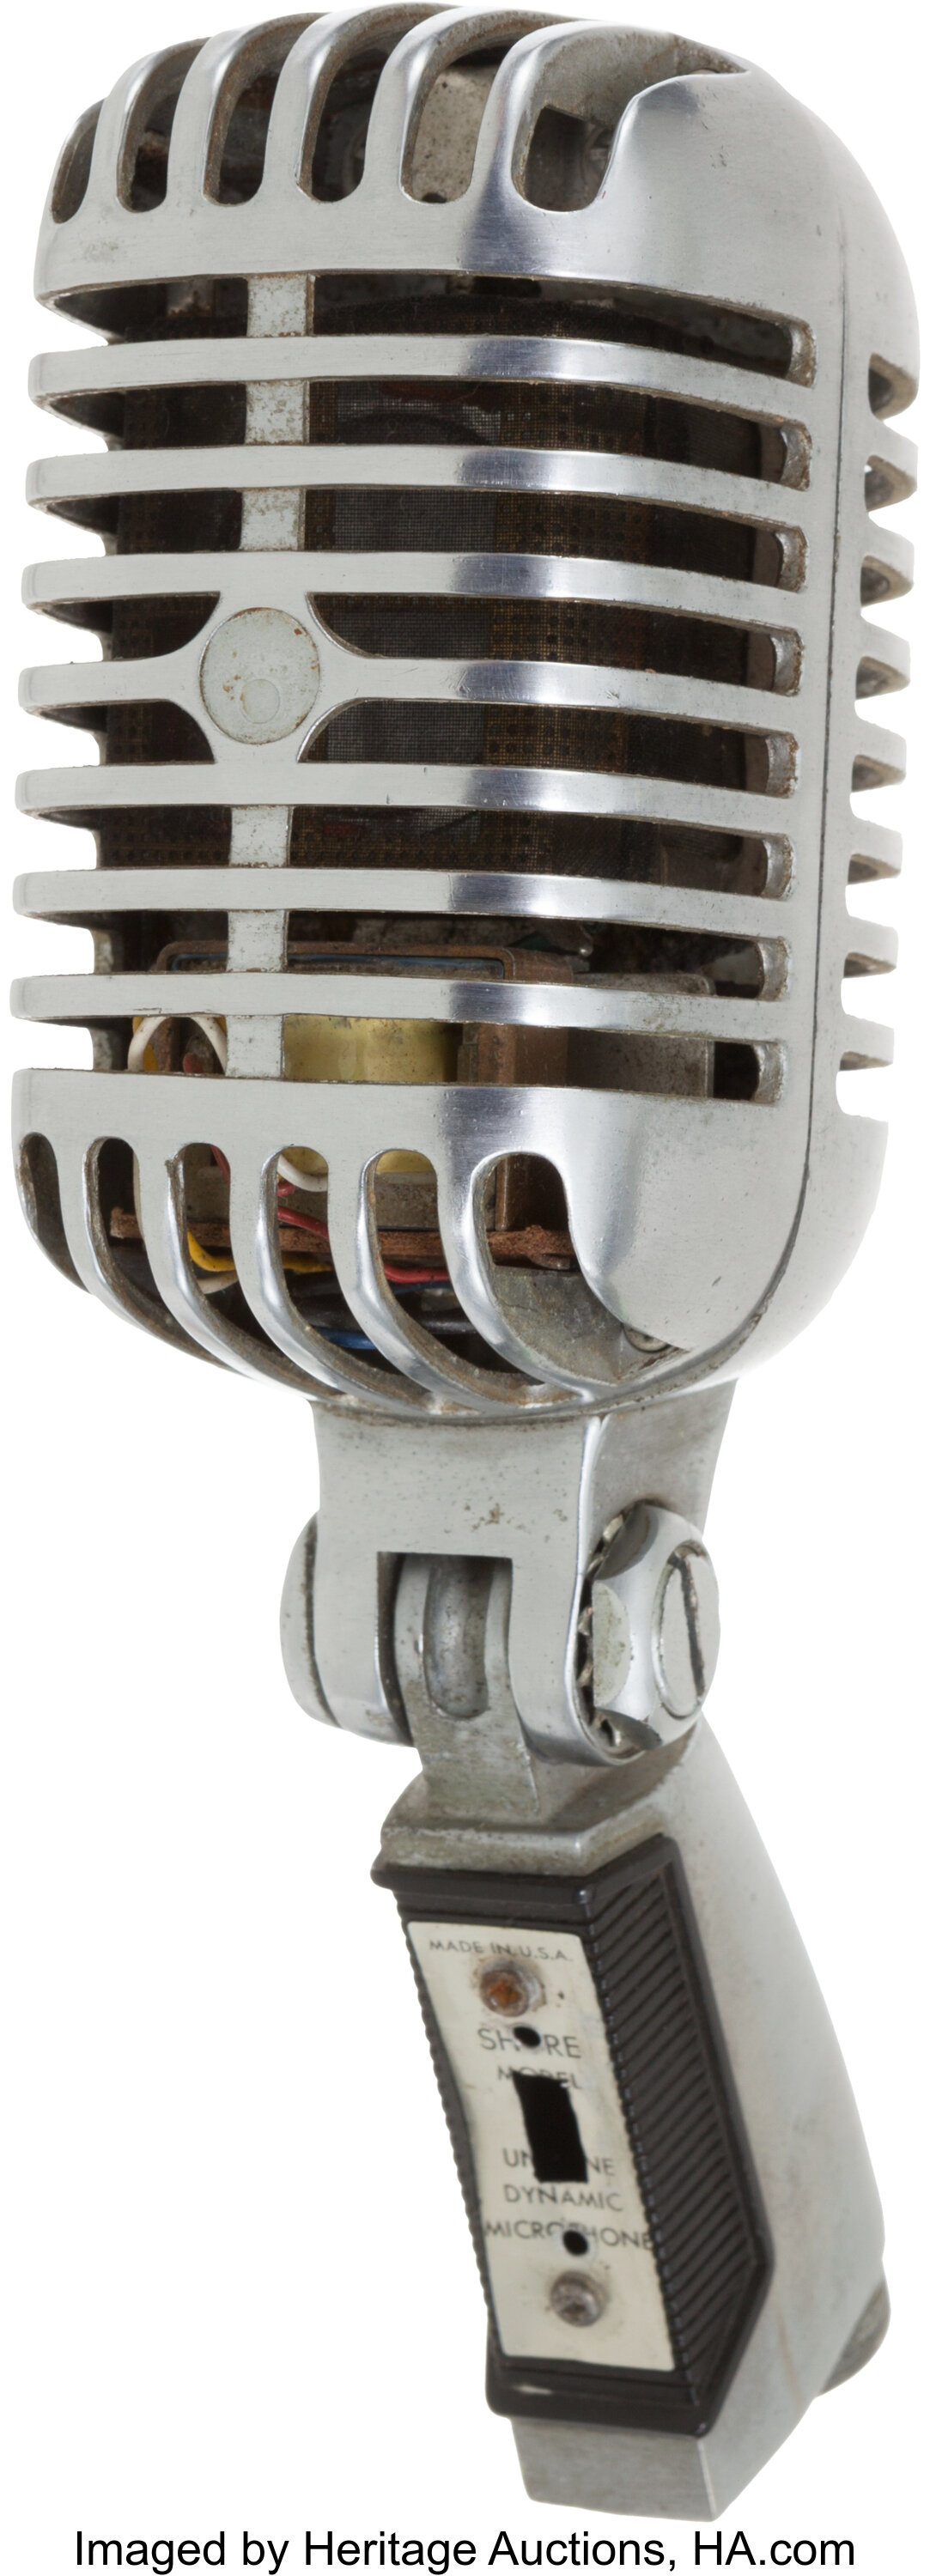 Elvis Presley Other Stars Used KWKH Shure Microphone | Lot #46277 | Heritage Auctions